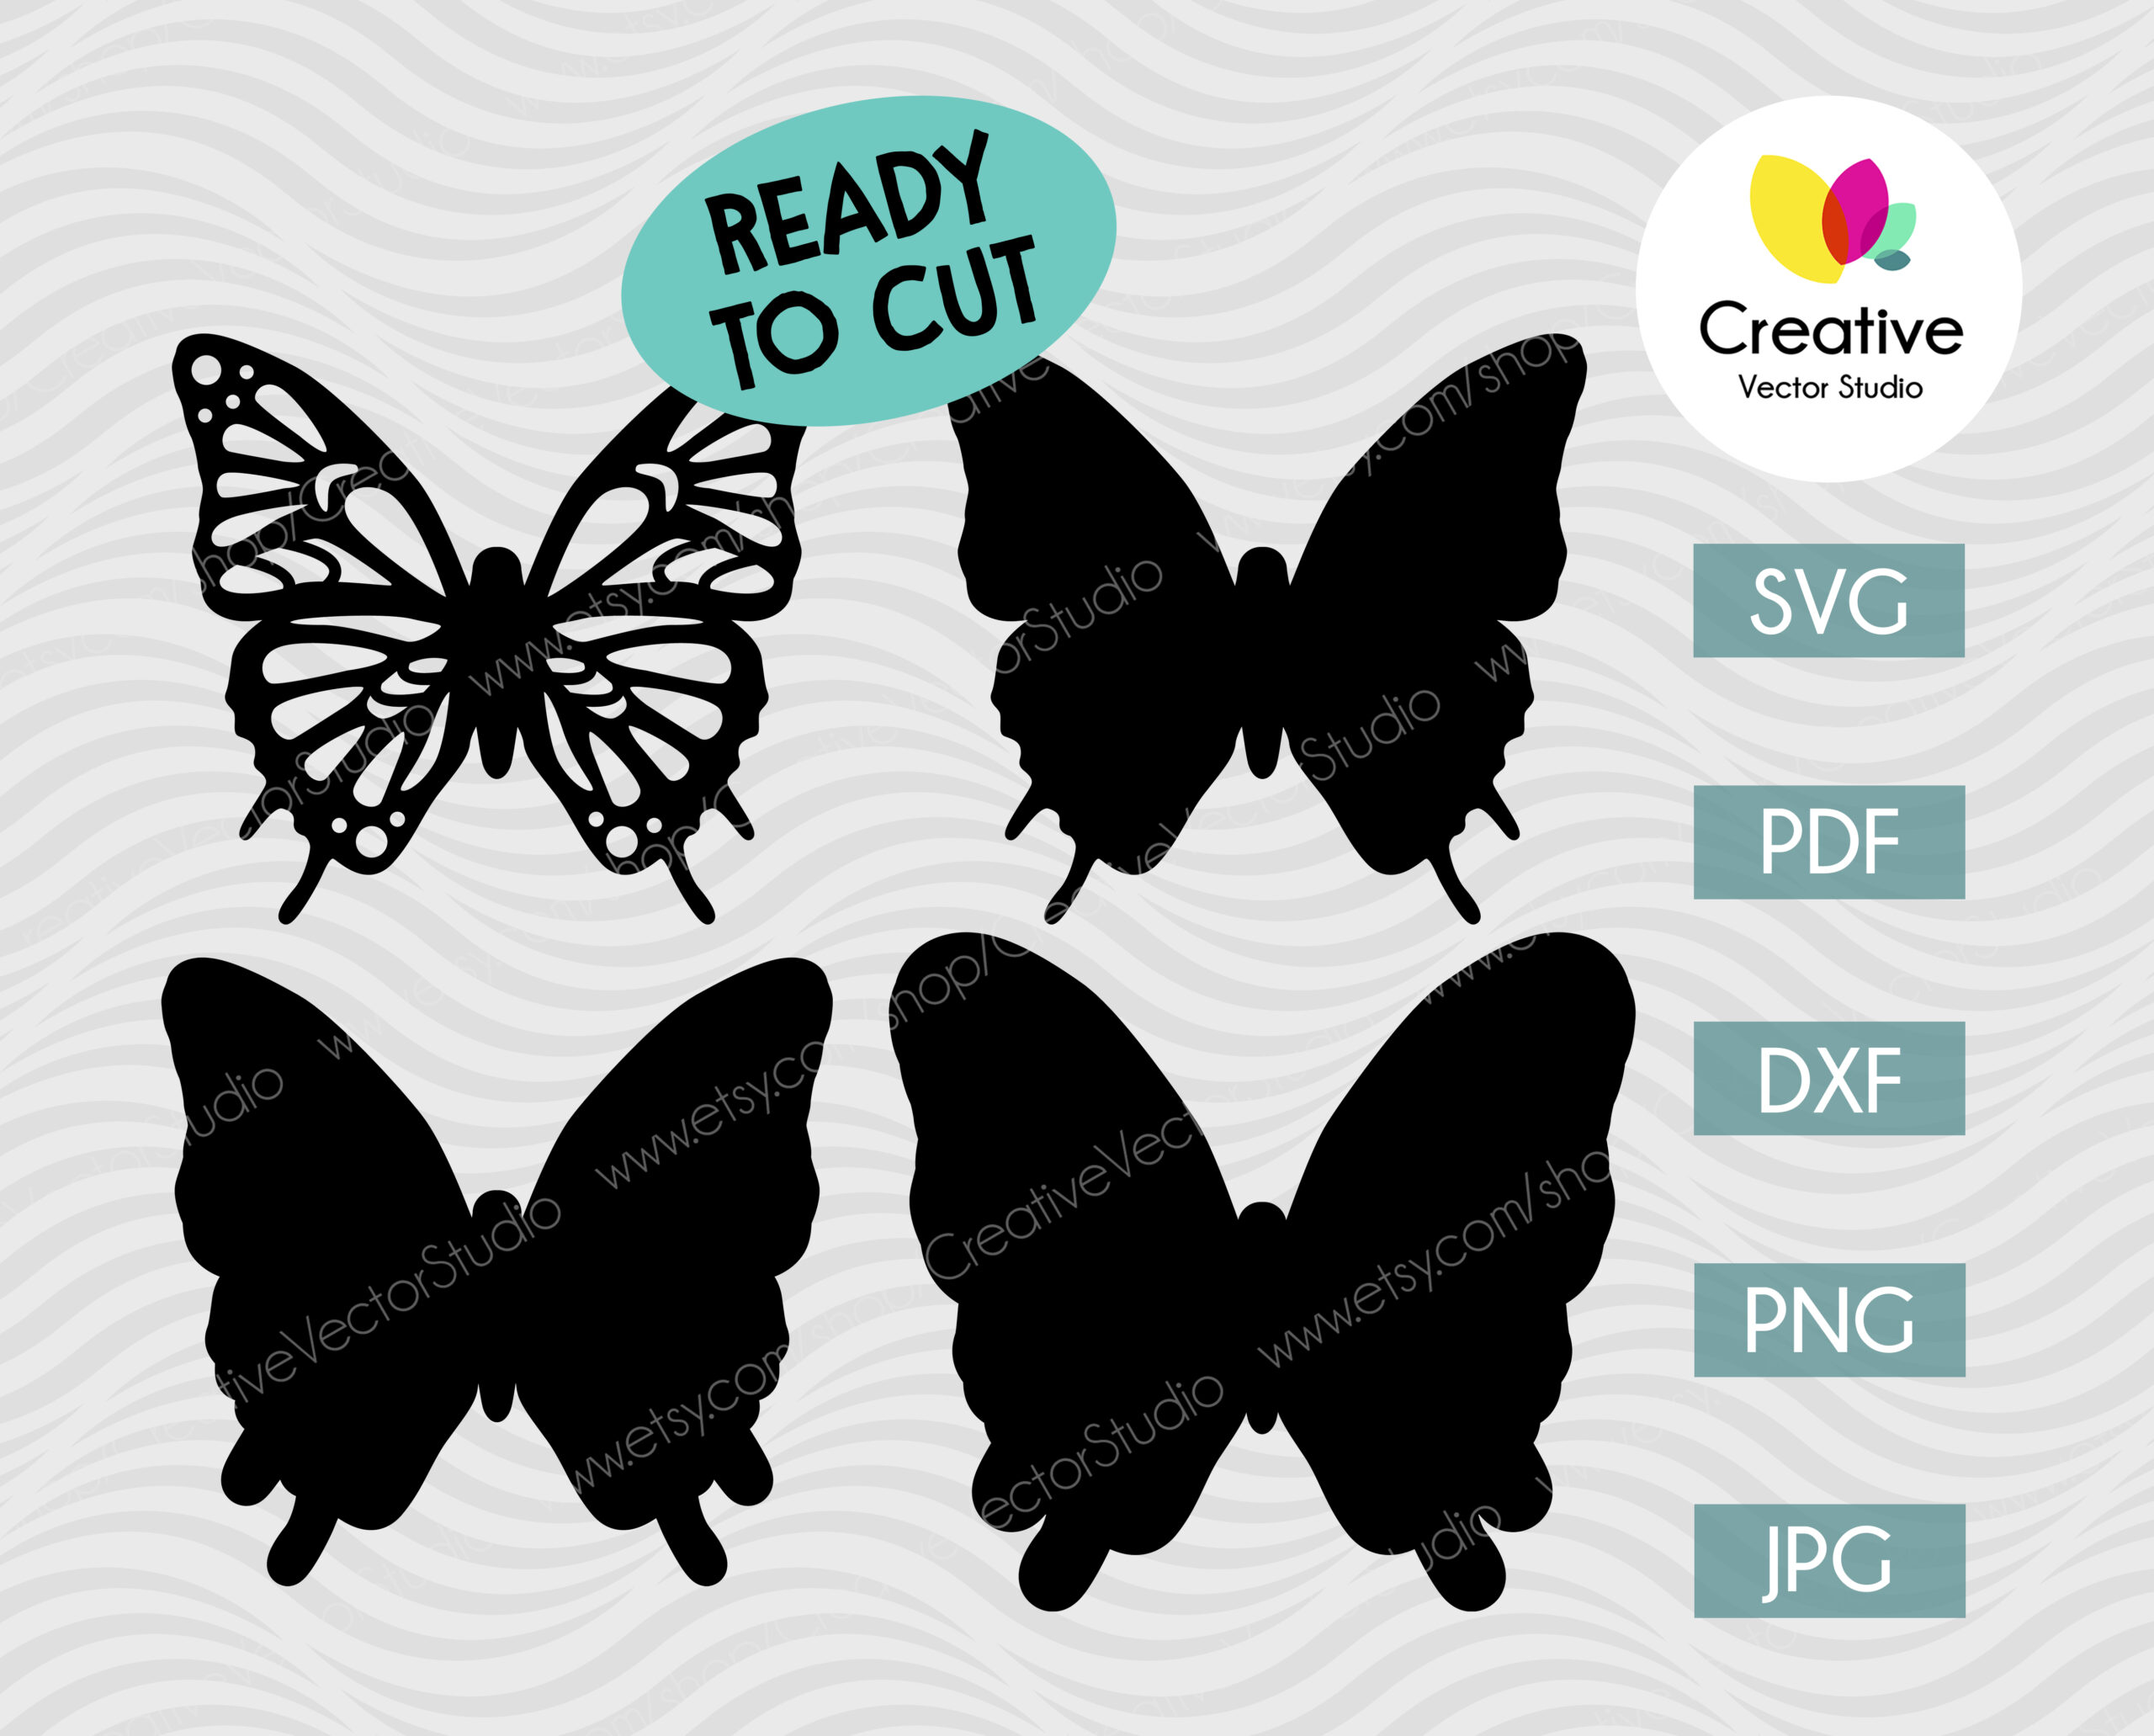 Butterfly SVG #6 Cut File Image - Creative Vector Studio